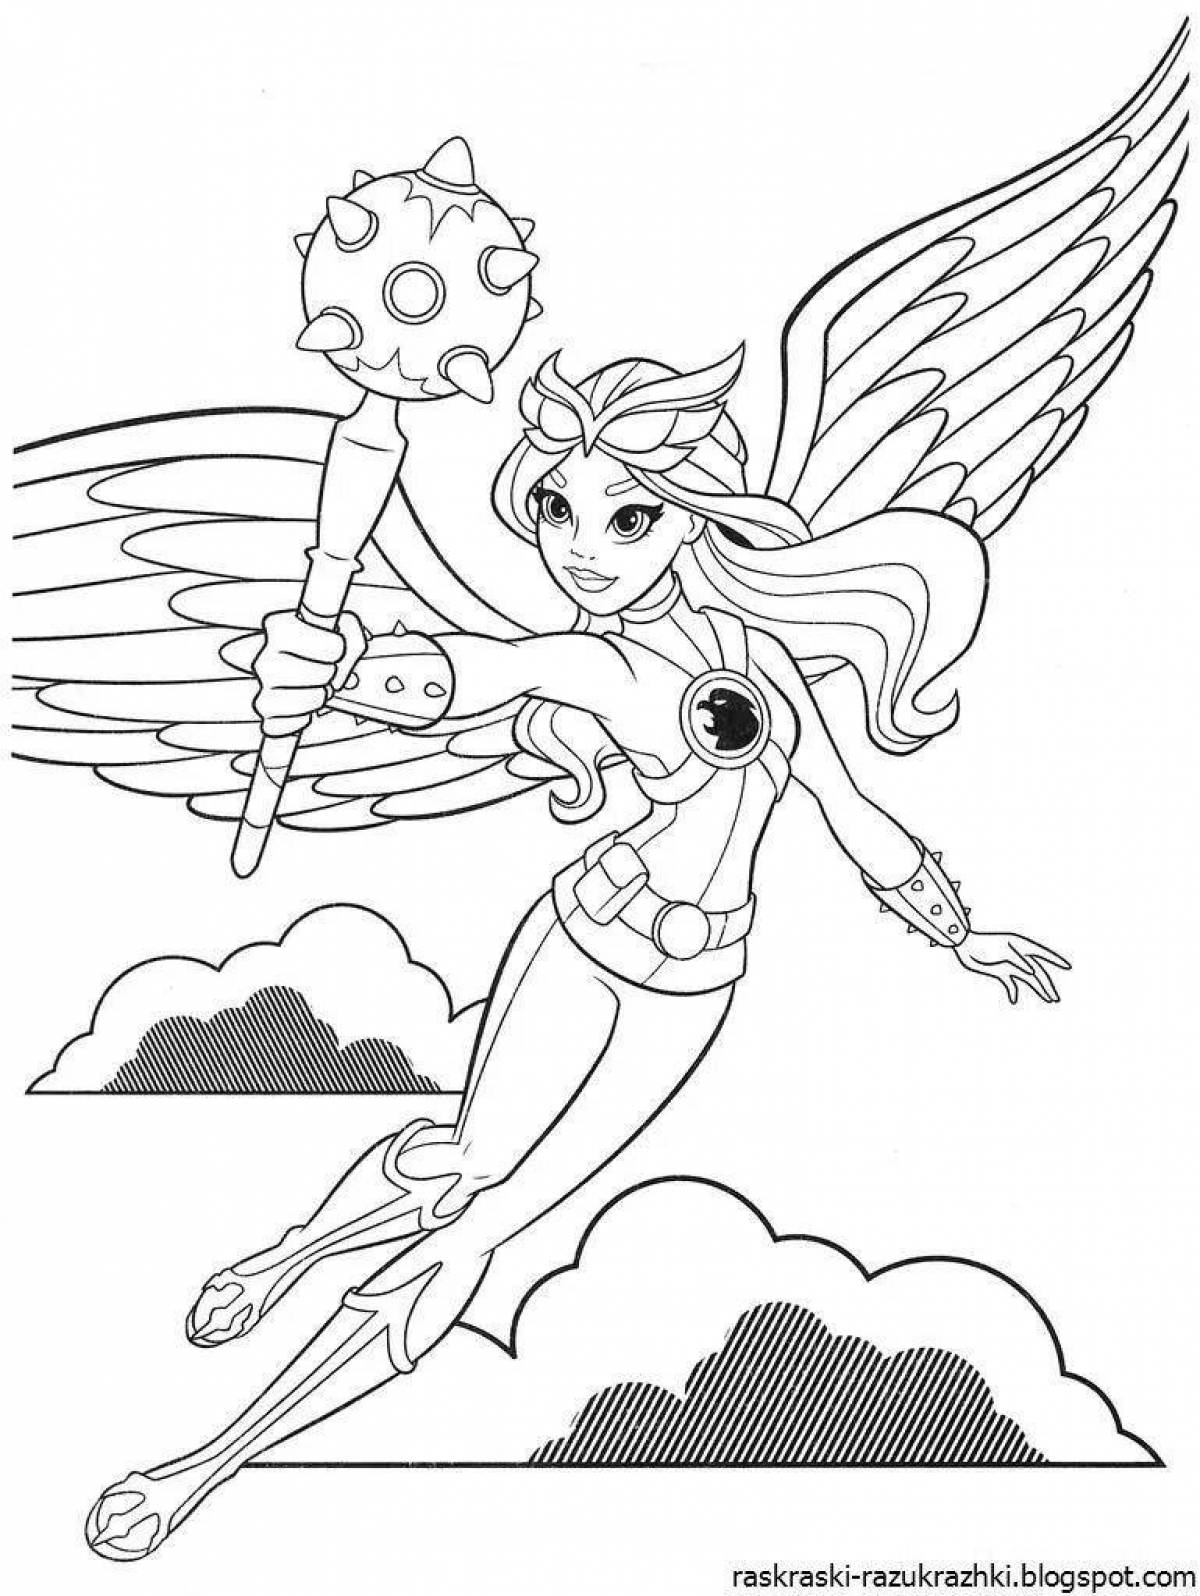 Radiant super mix coloring book for girls